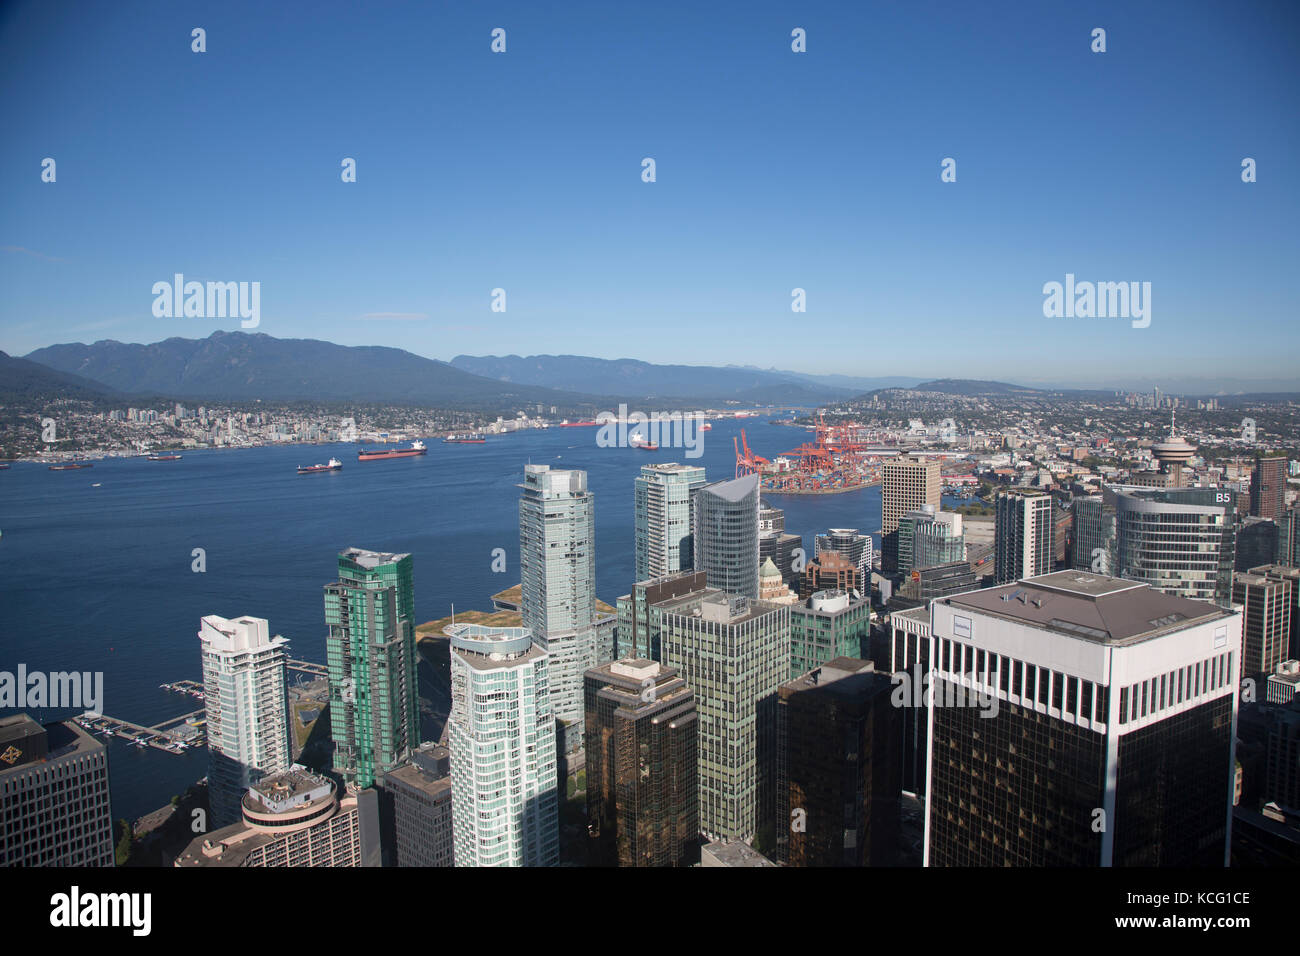 North America, Canada, British Columbia, Vancouver, high angle view of Port area of Vancouver. City skyline, waterfront and harbour area in distance Stock Photo